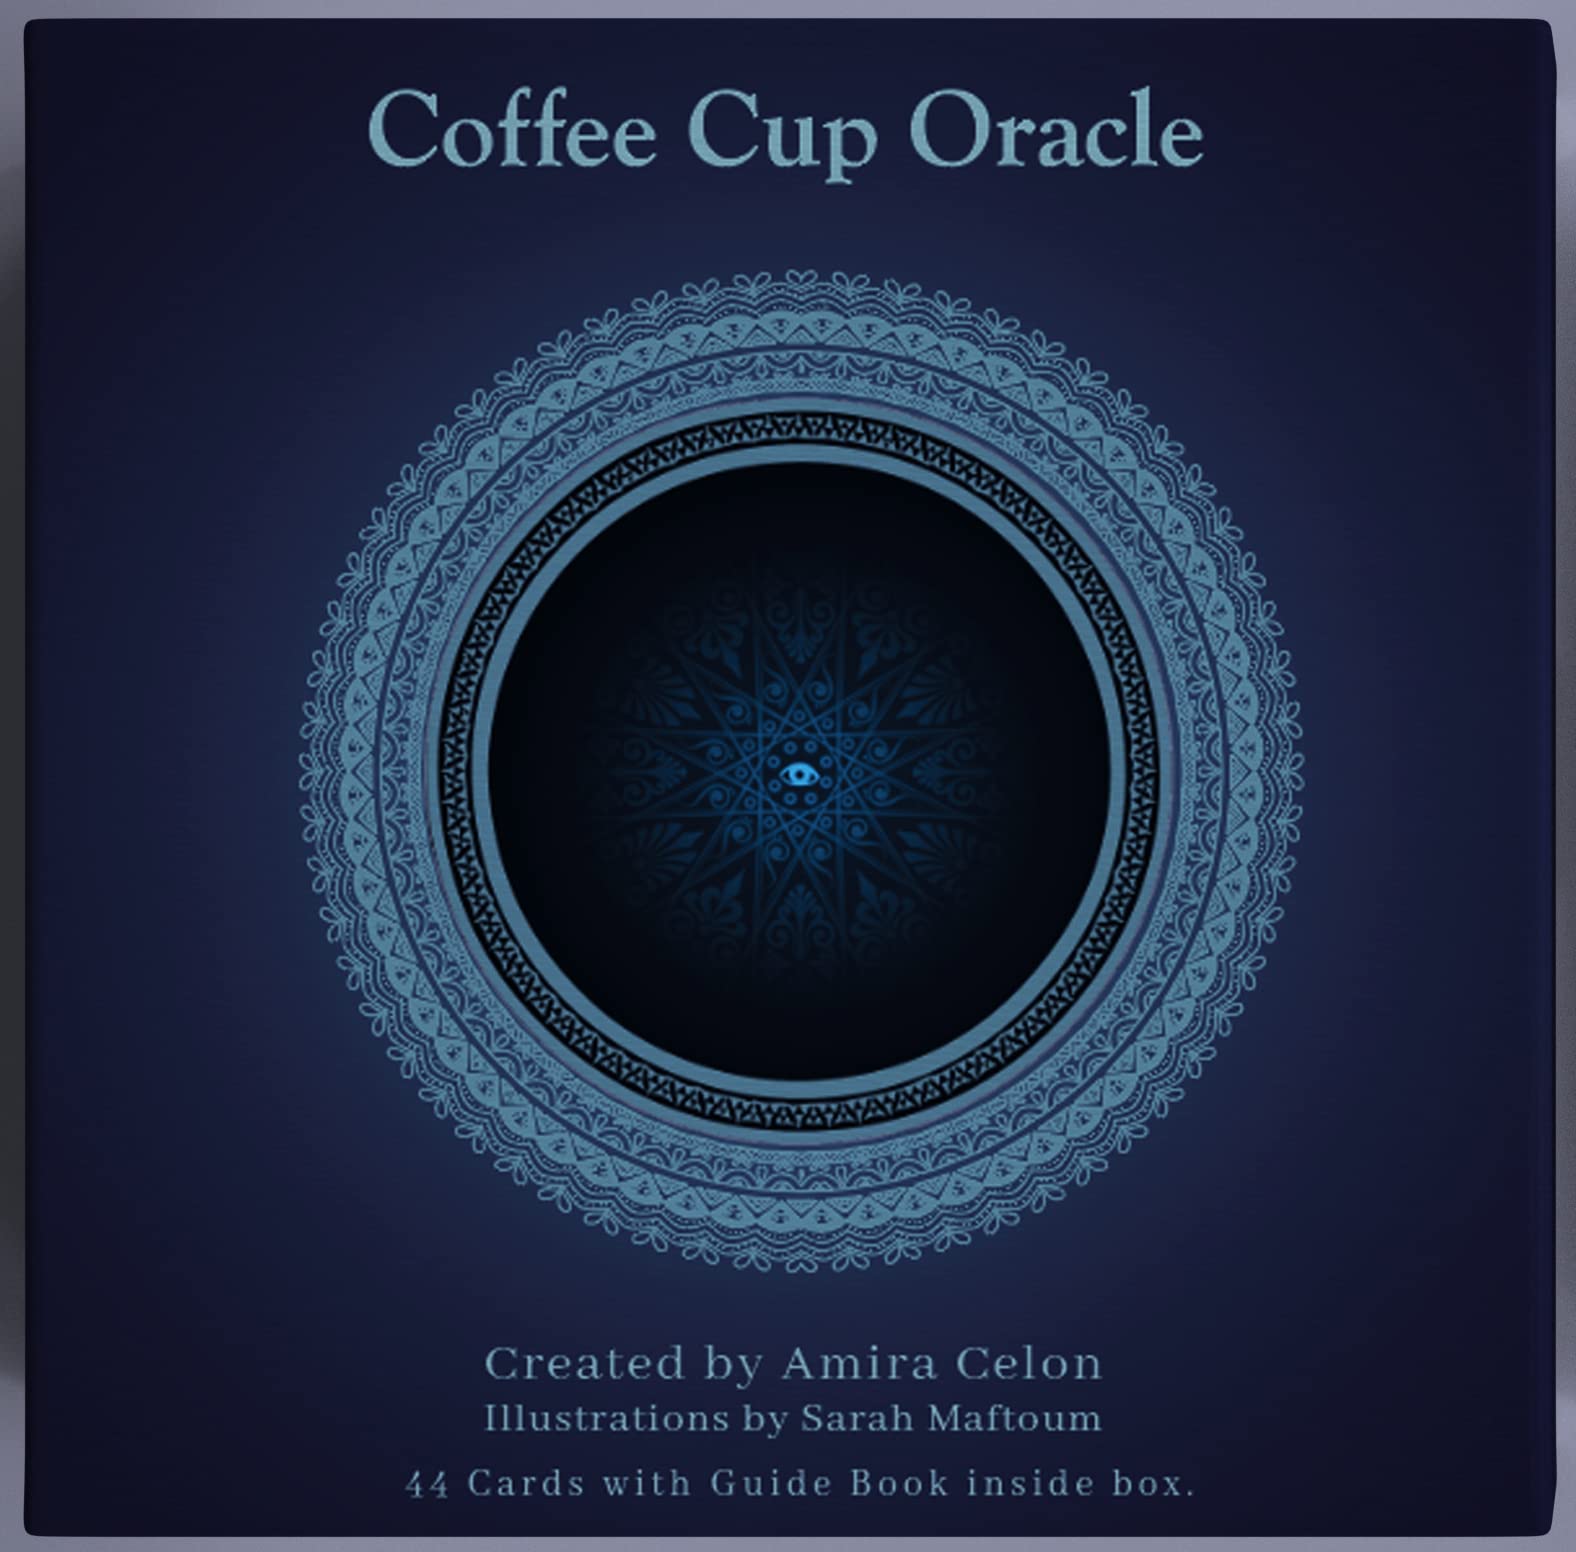 The Coffee Cup Oracle